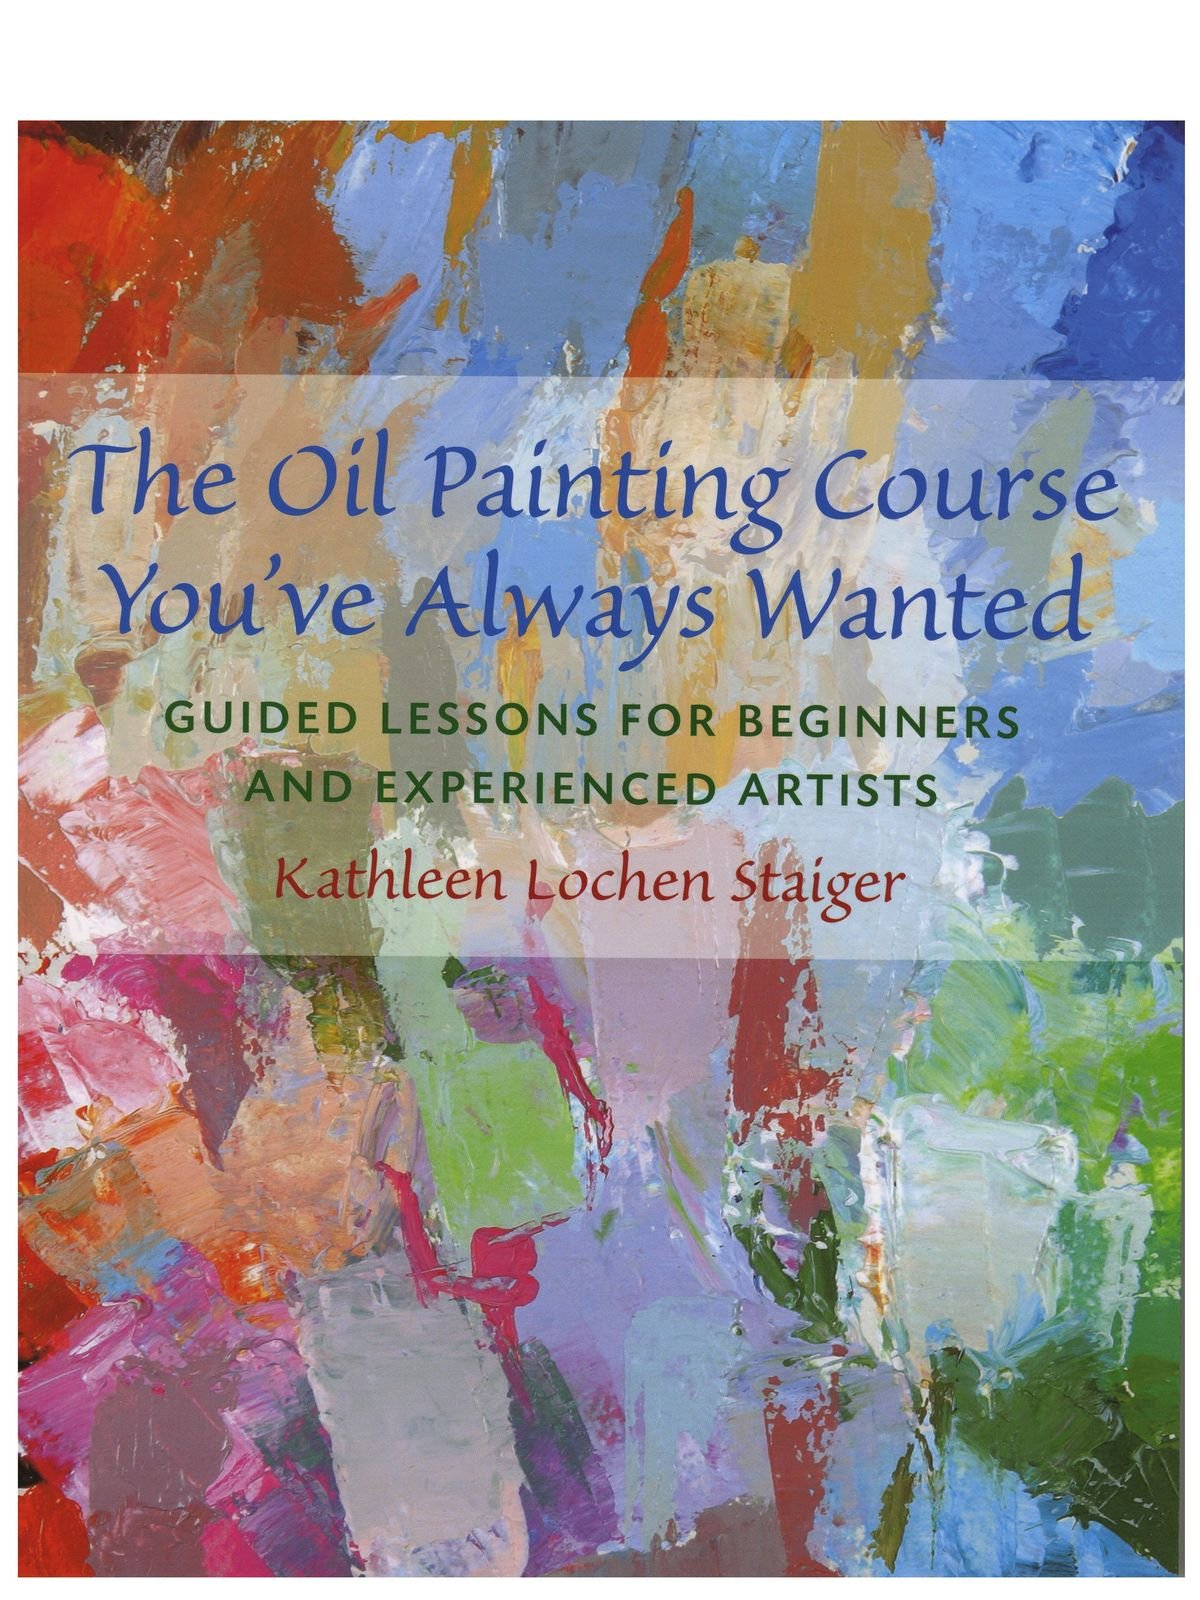 The Oil Painting Course You've Always Wanted